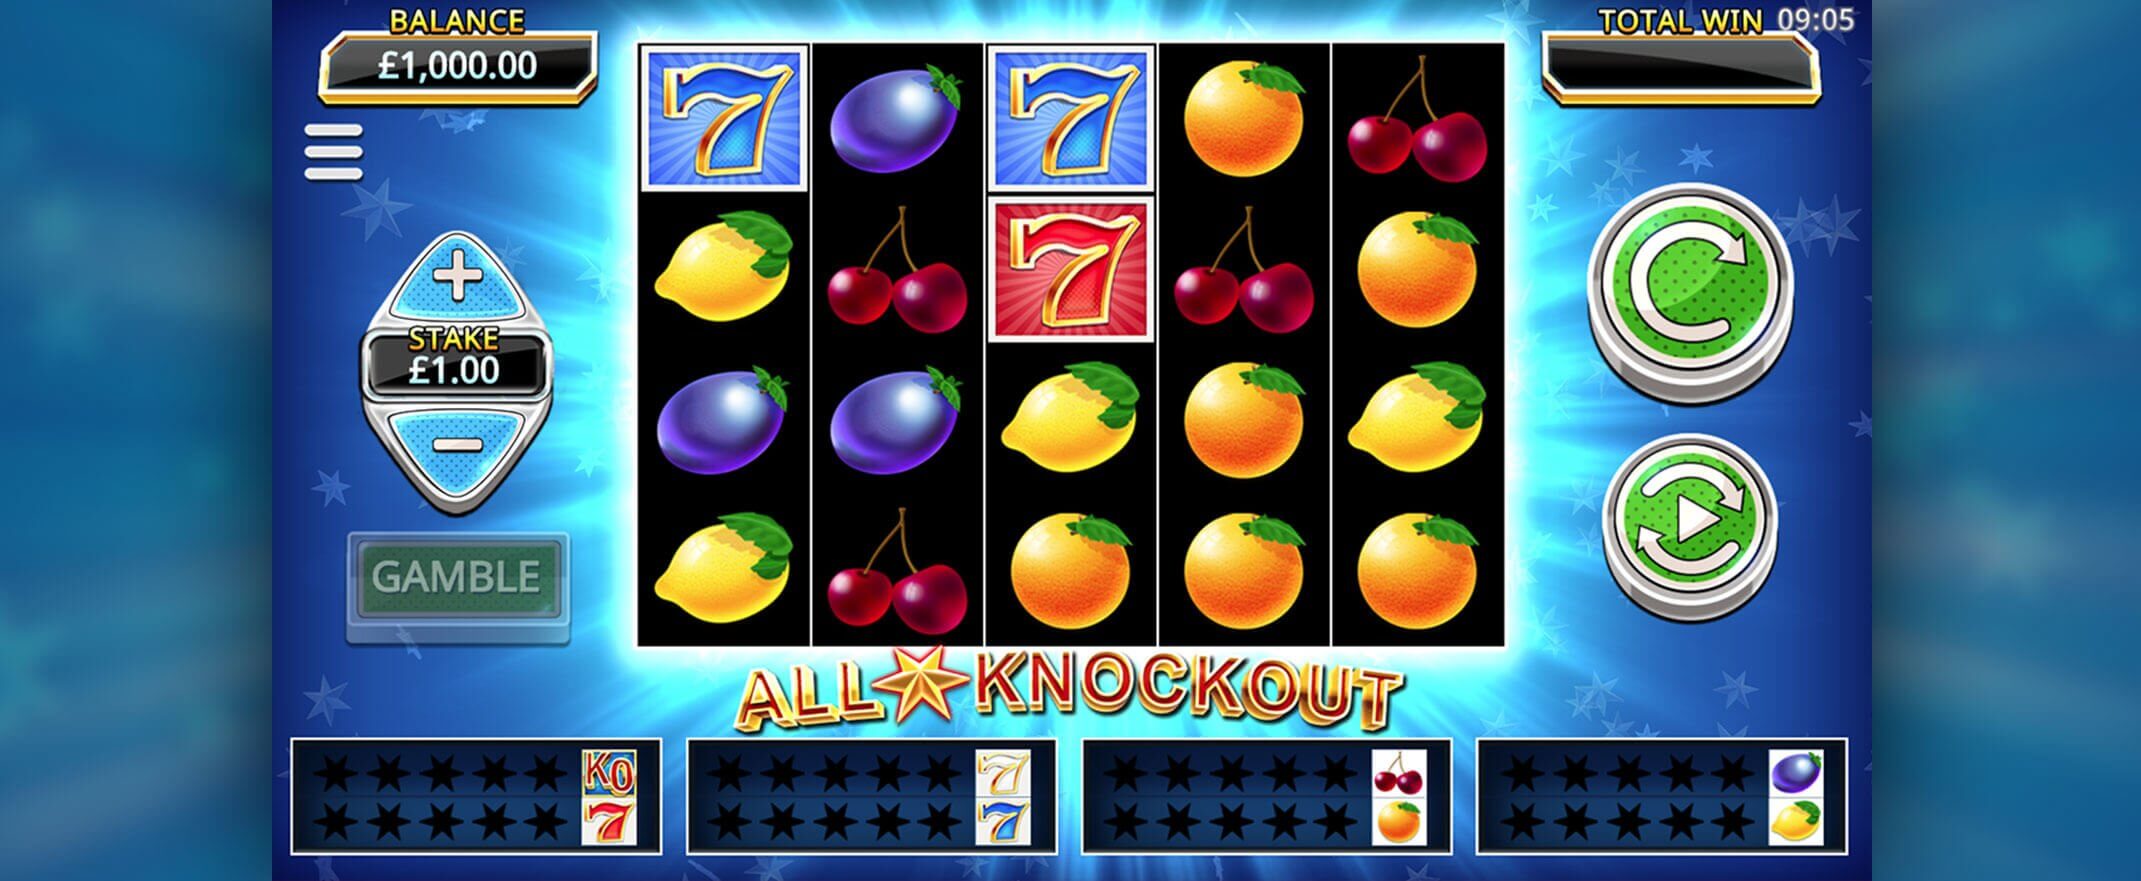 All Star Knockout Slot Gameplay